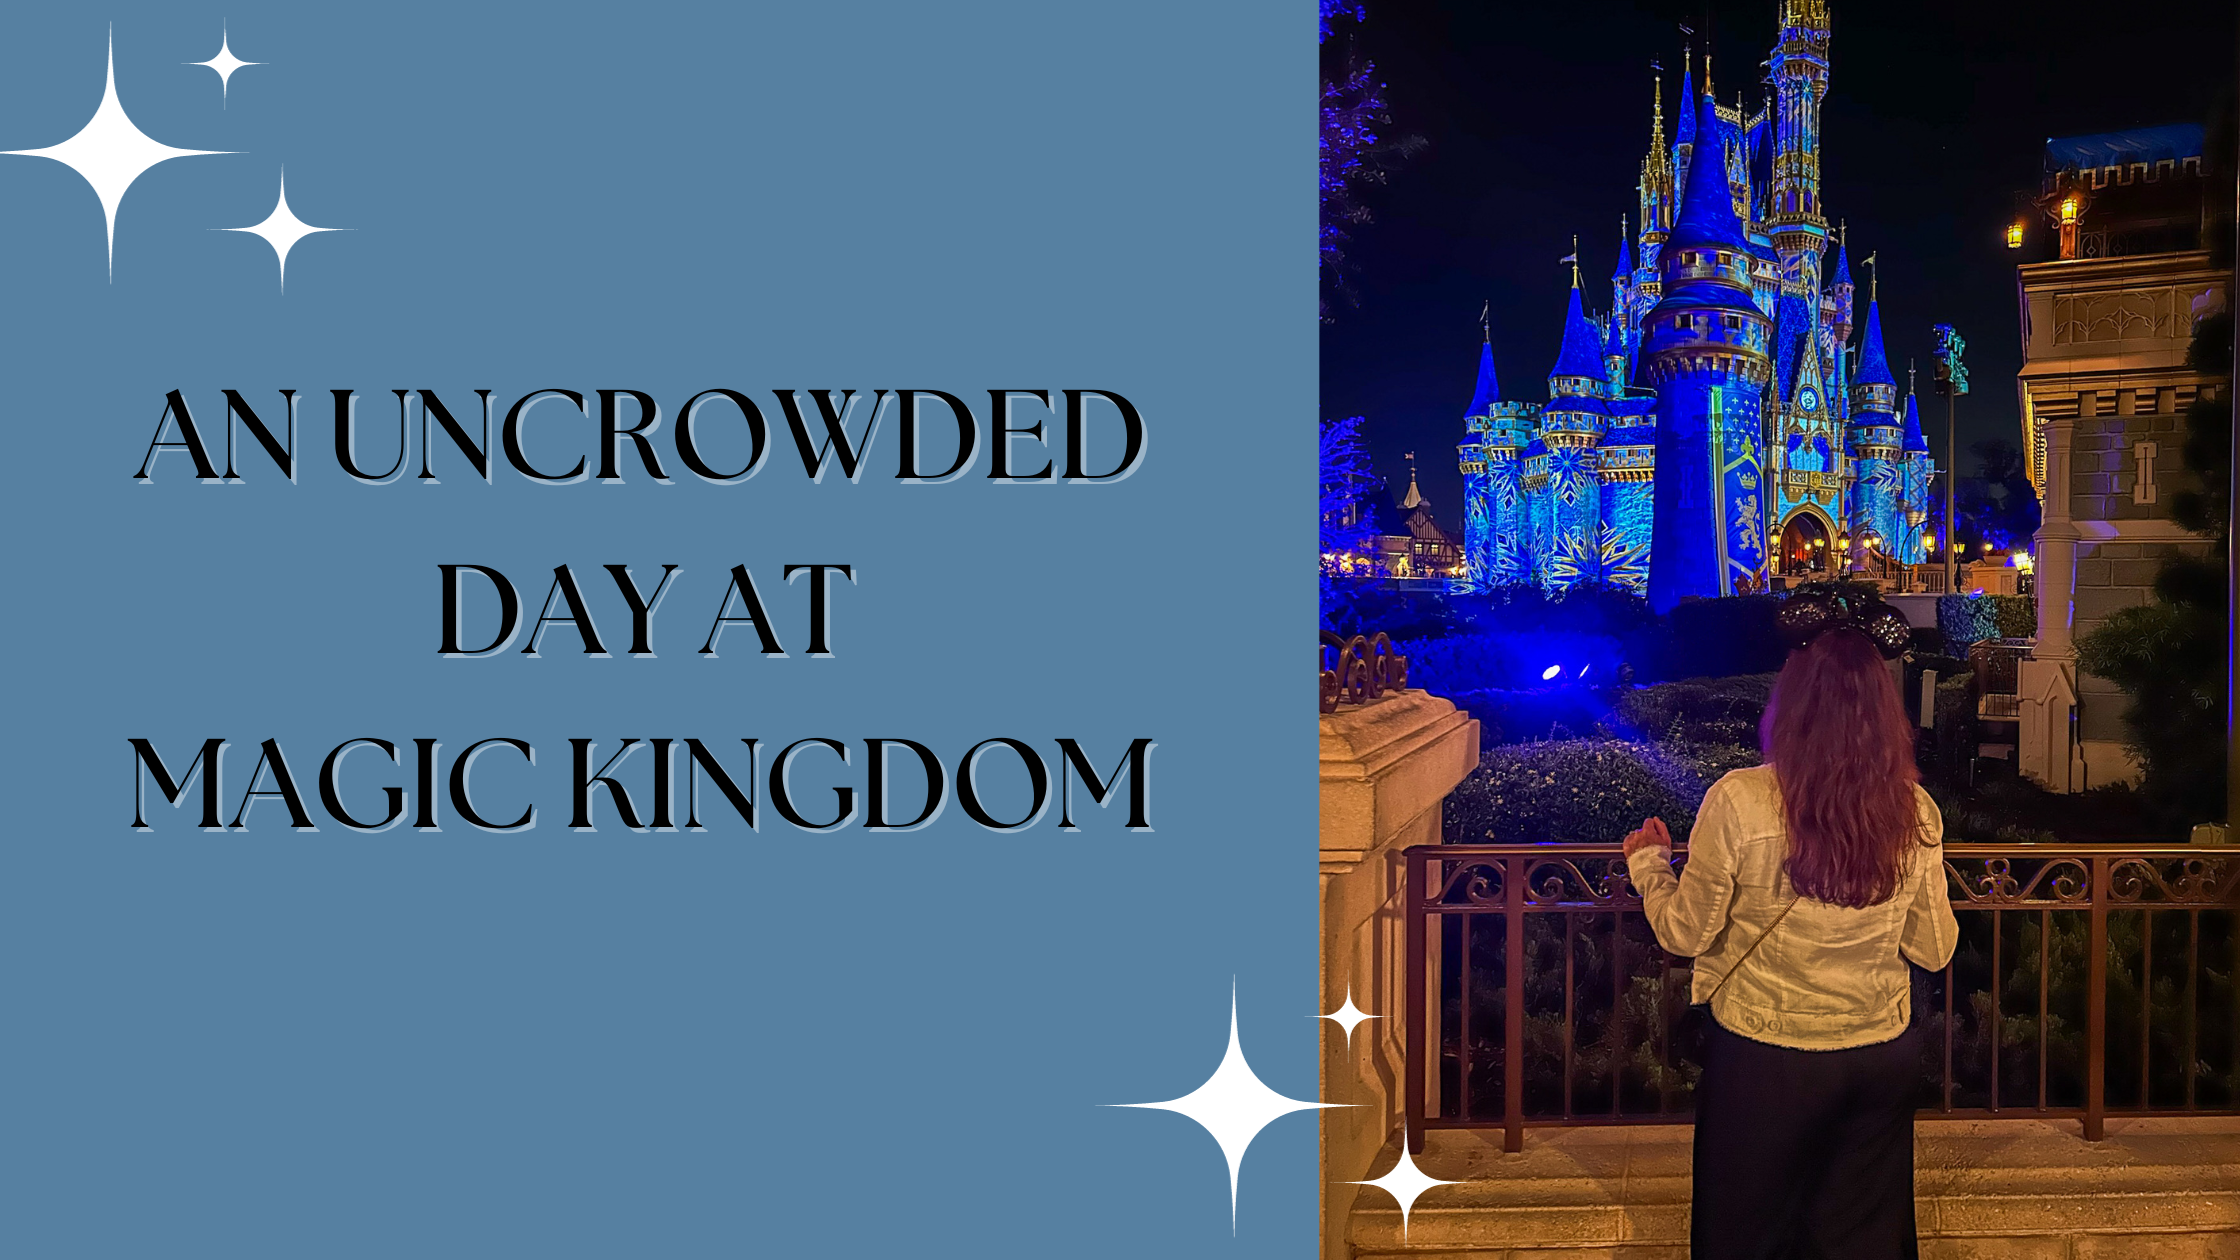 An Uncrowded Day at Magic Kingdom